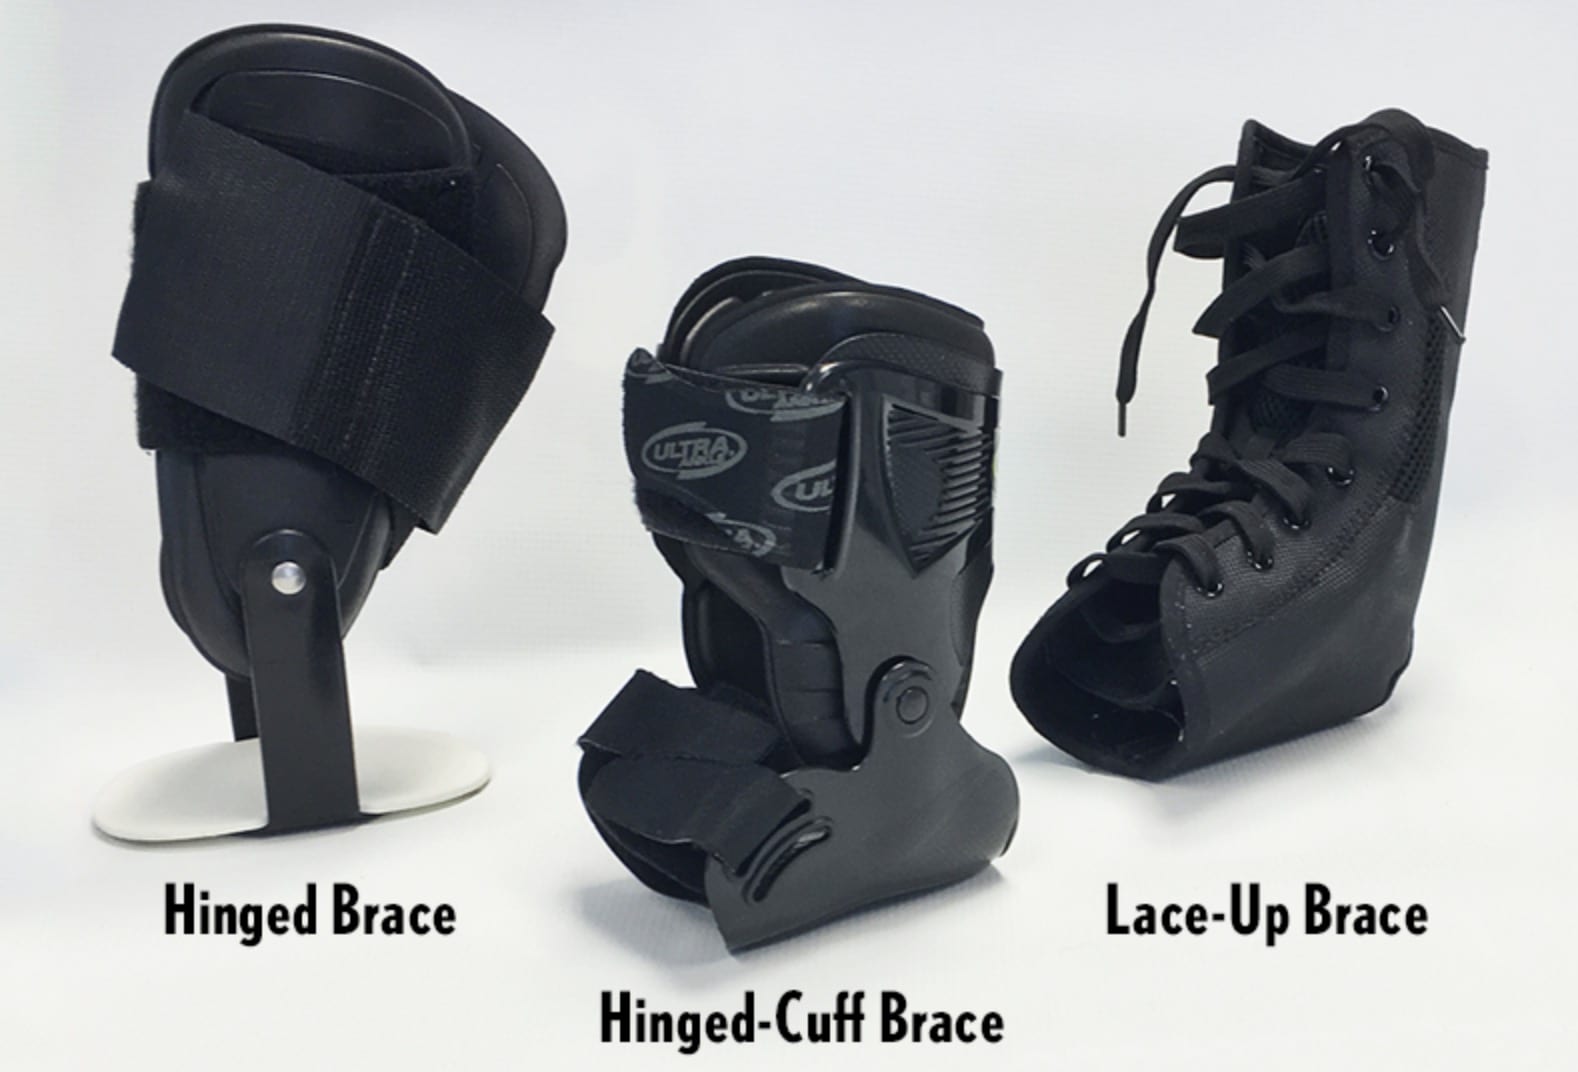 Volleyball Ankle Braces Compared - Ultra Ankle